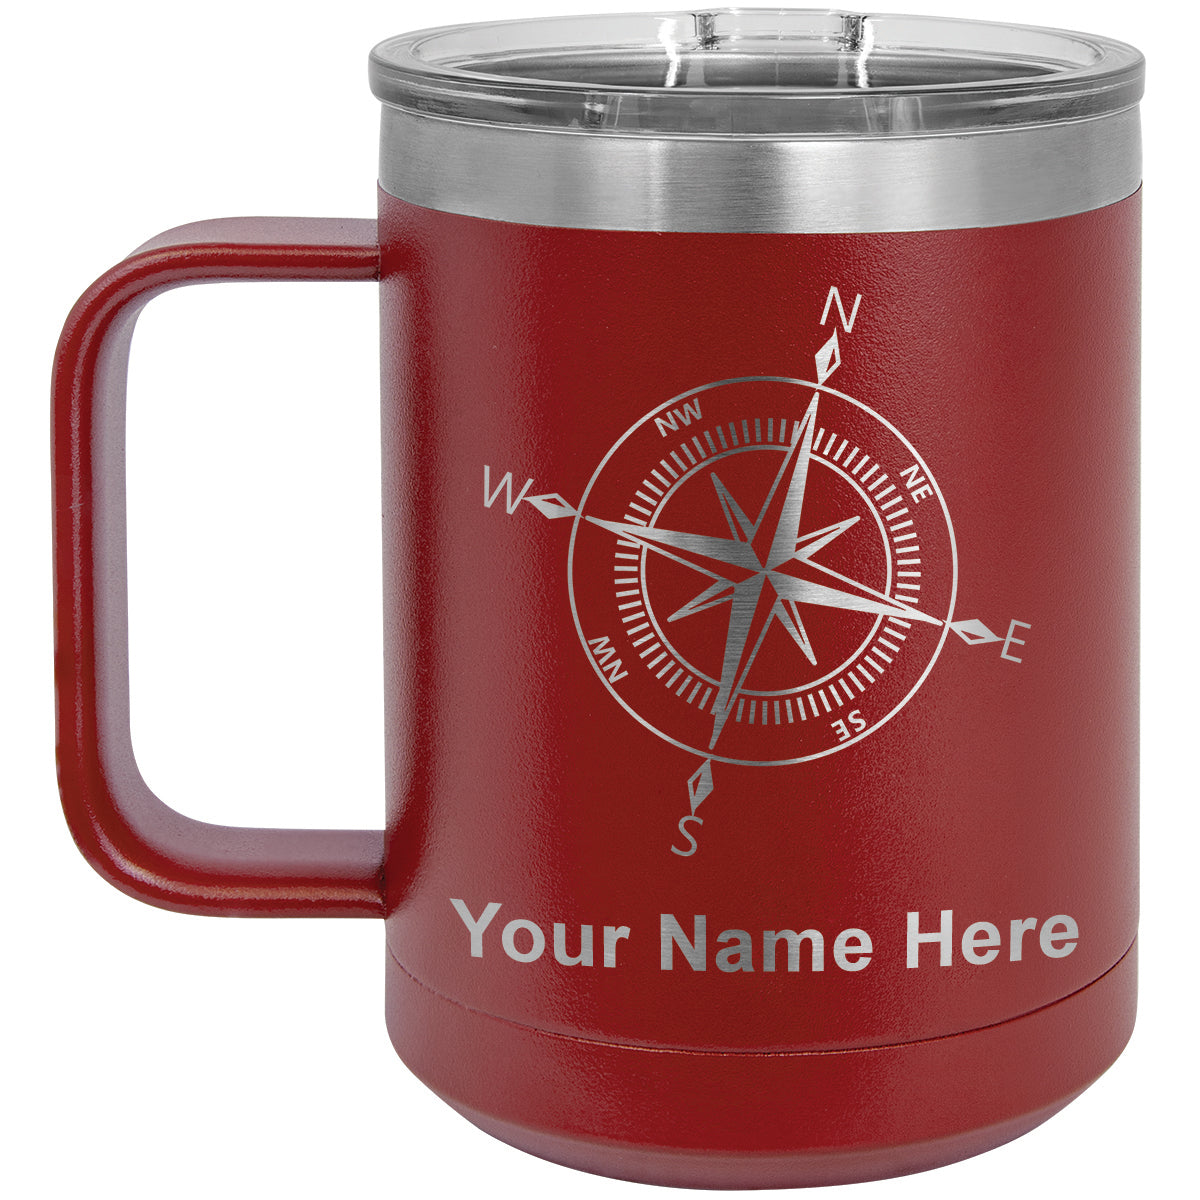 15oz Vacuum Insulated Coffee Mug, Compass Rose, Personalized Engraving Included